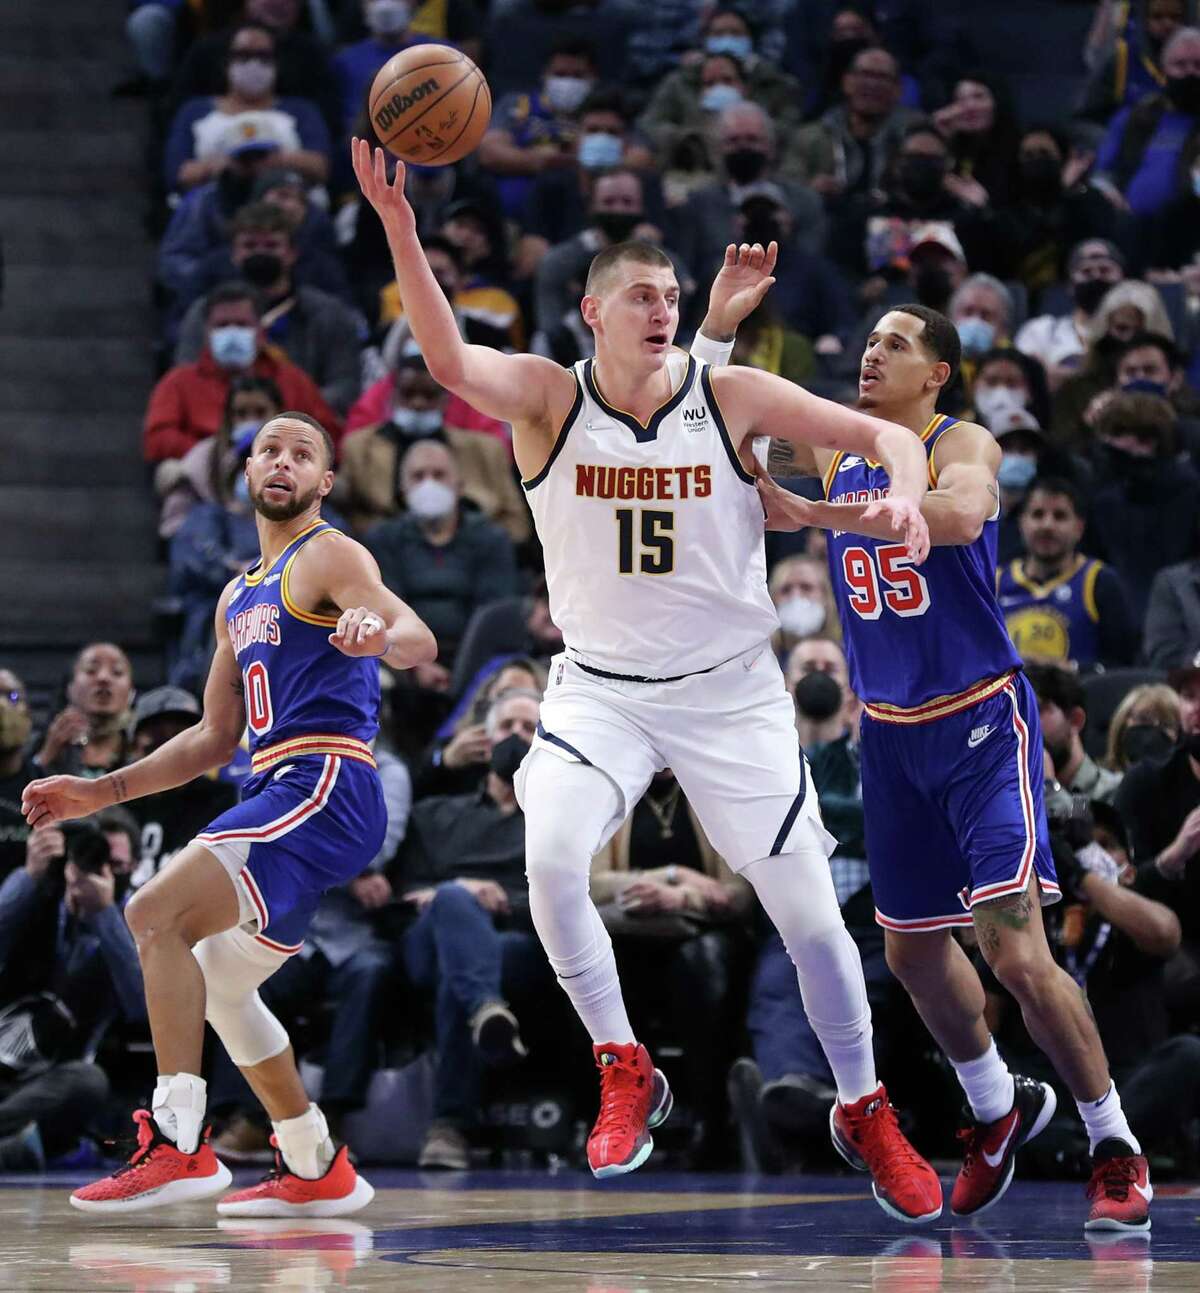 Denver and Nikola Jokic take on the Warriors in the opener of their playoff series at Chase Center at 5:30 p.m. Saturday (Channels 7, 10/95.7).